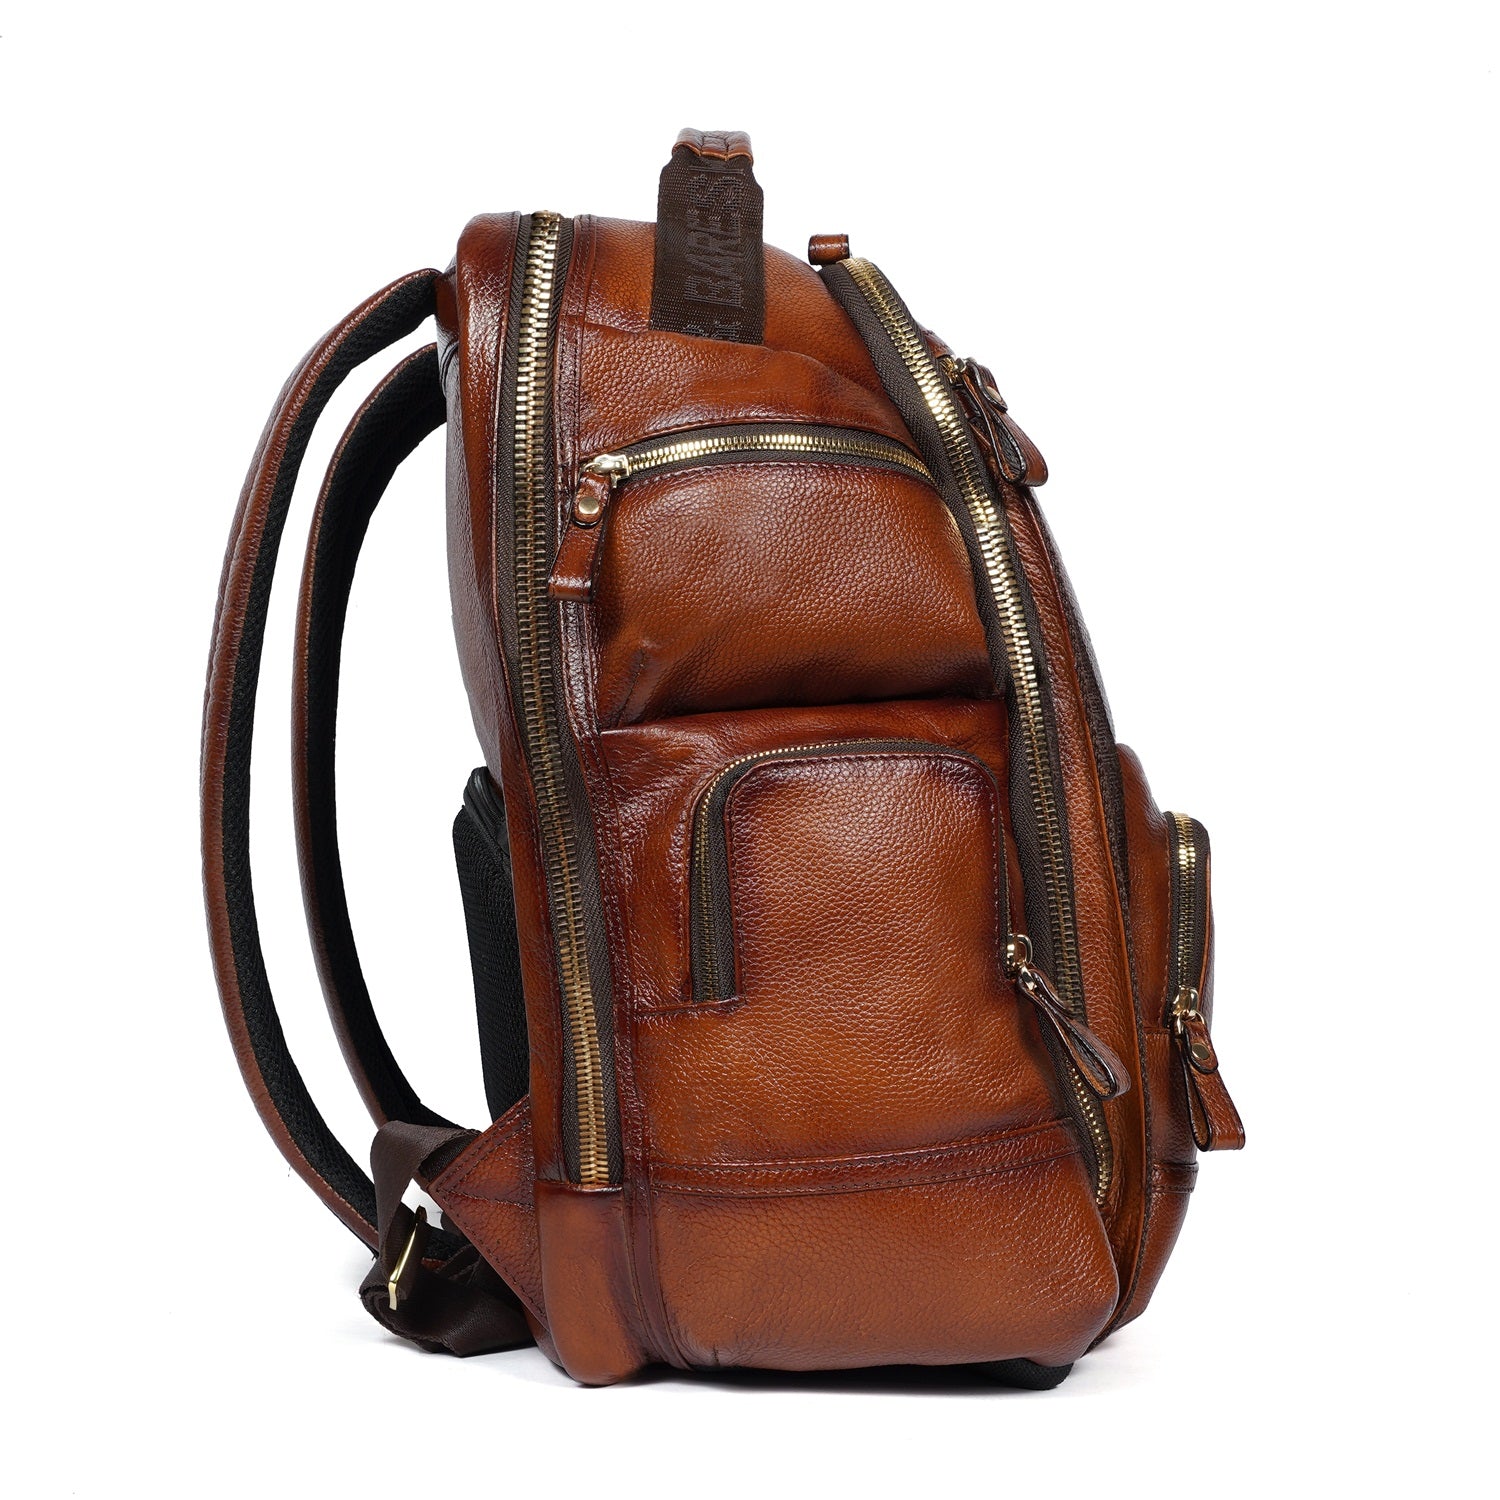 Small Backpack | Meadowlark Tan - Heart and Home Gifts and Accessories